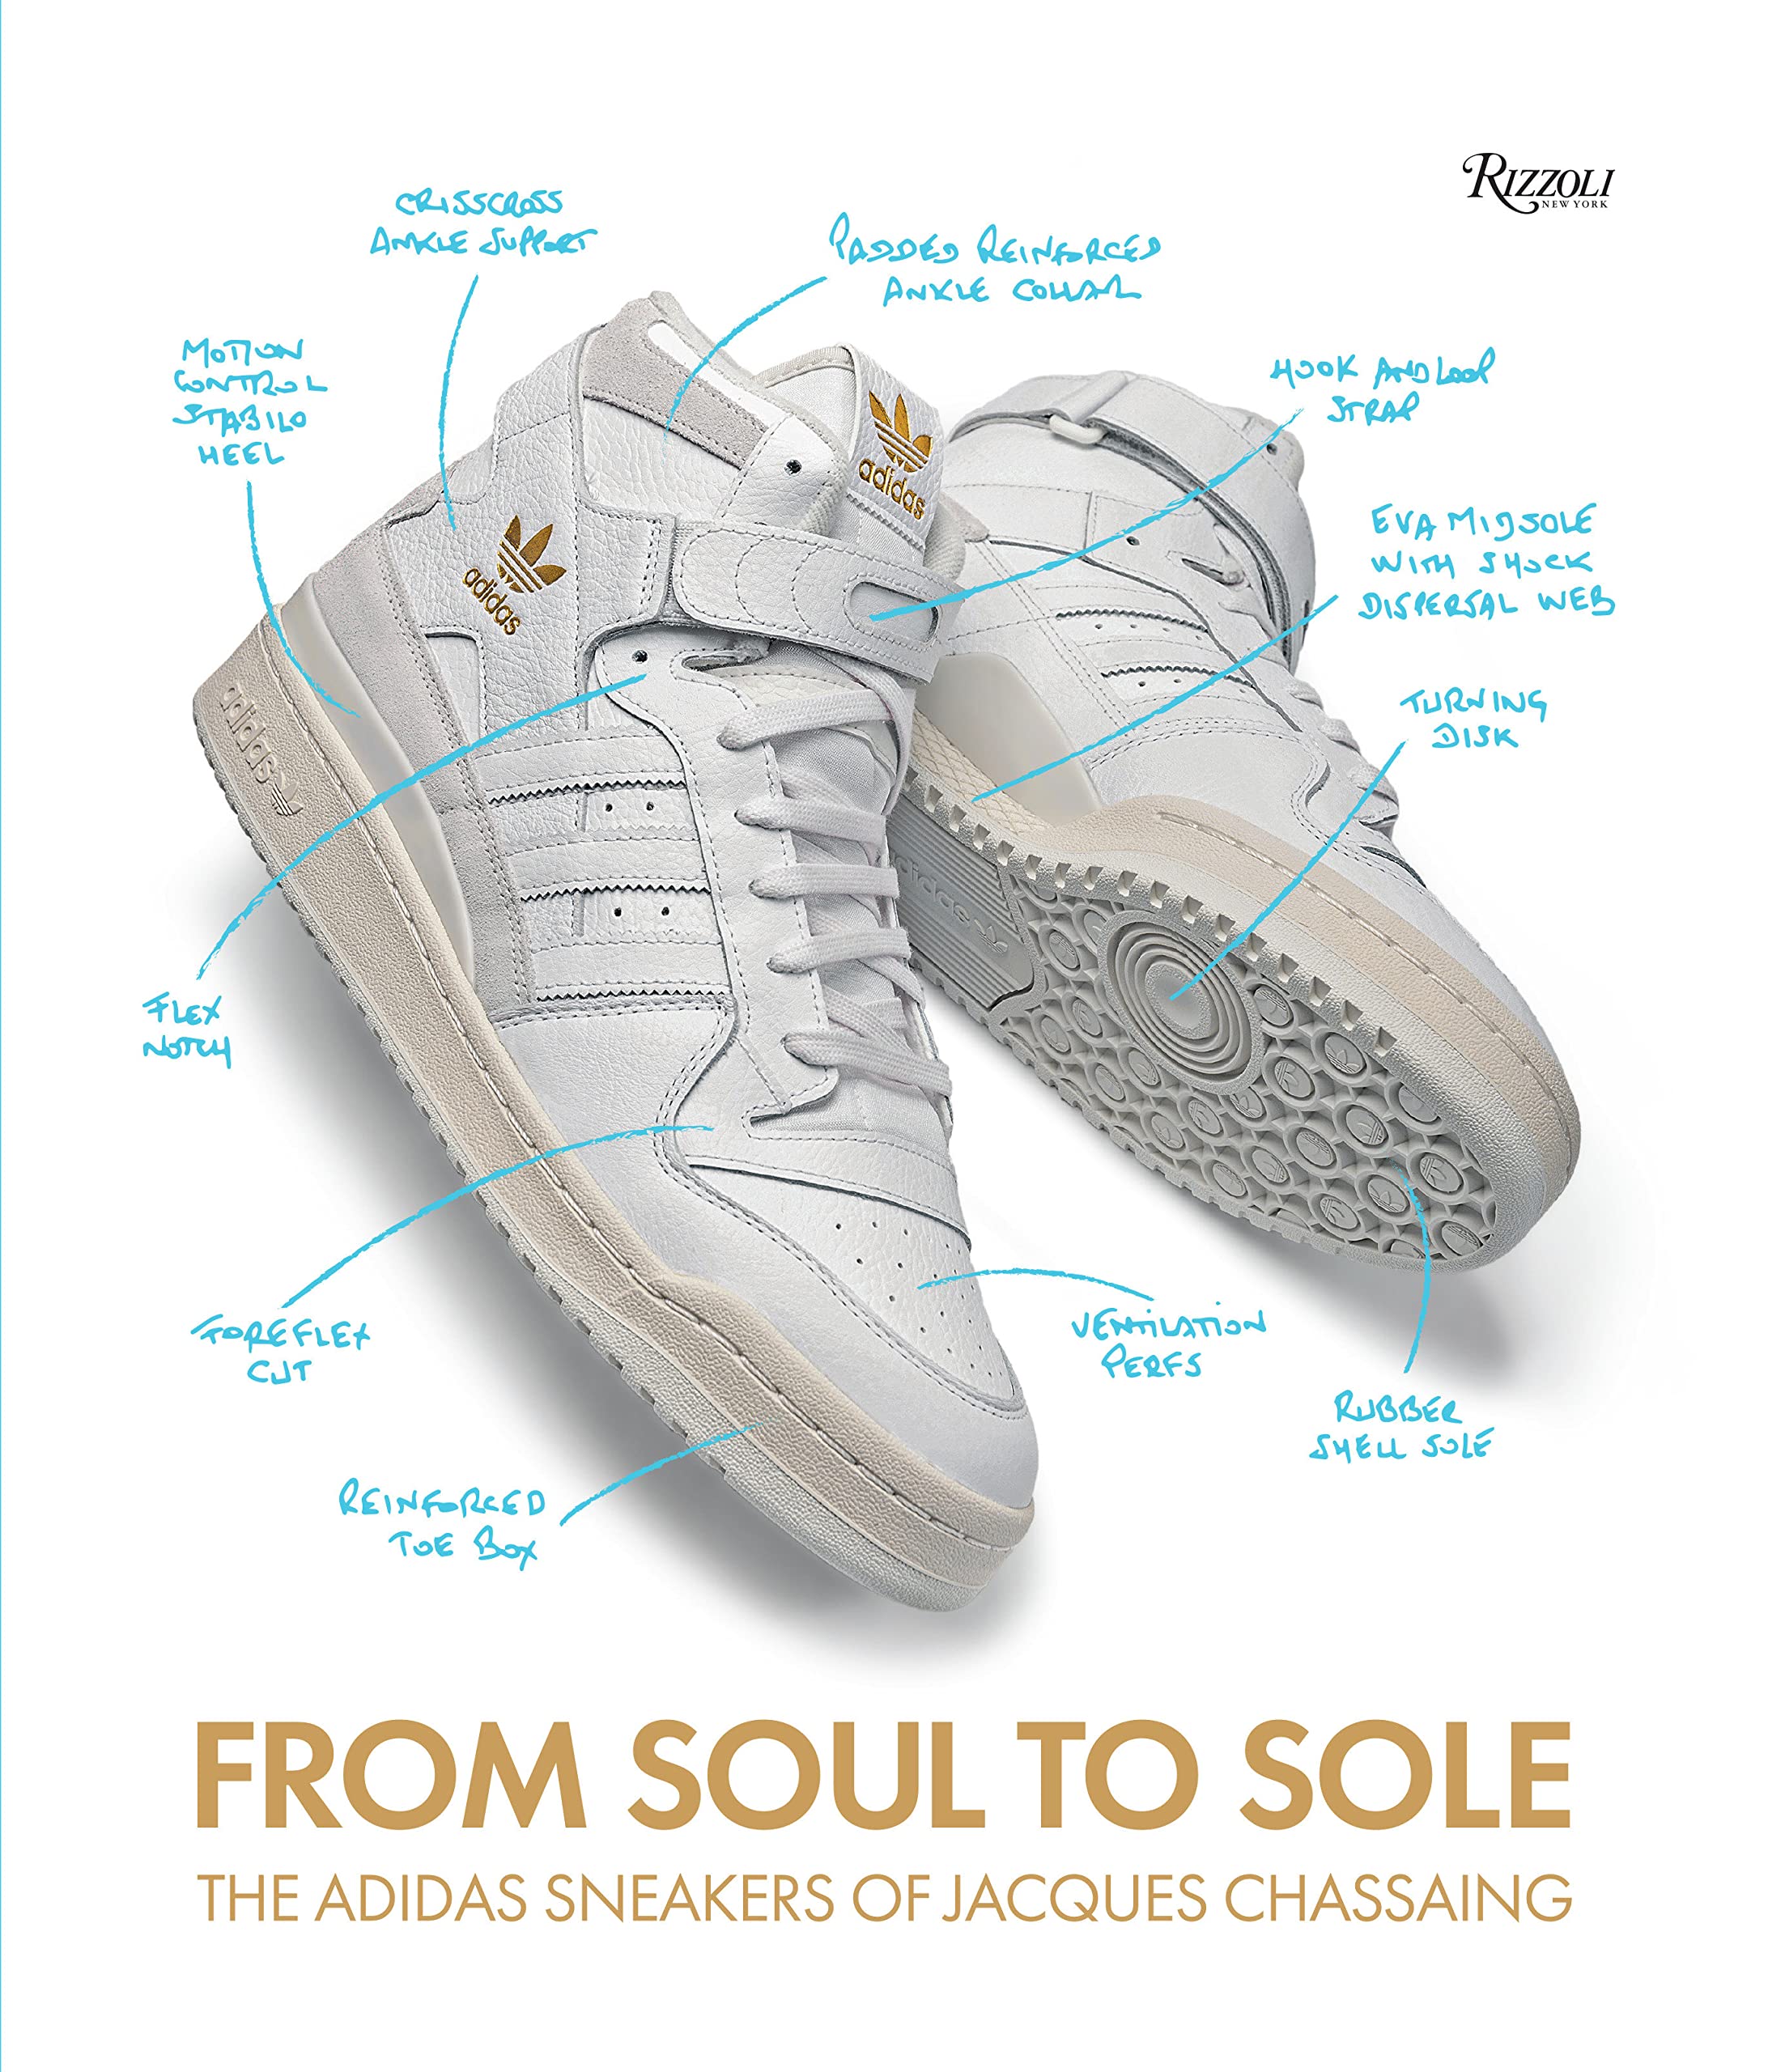 adidas 0044 02a From Soul to Sole: The Adidas Sneakers of Jacques Chassaing